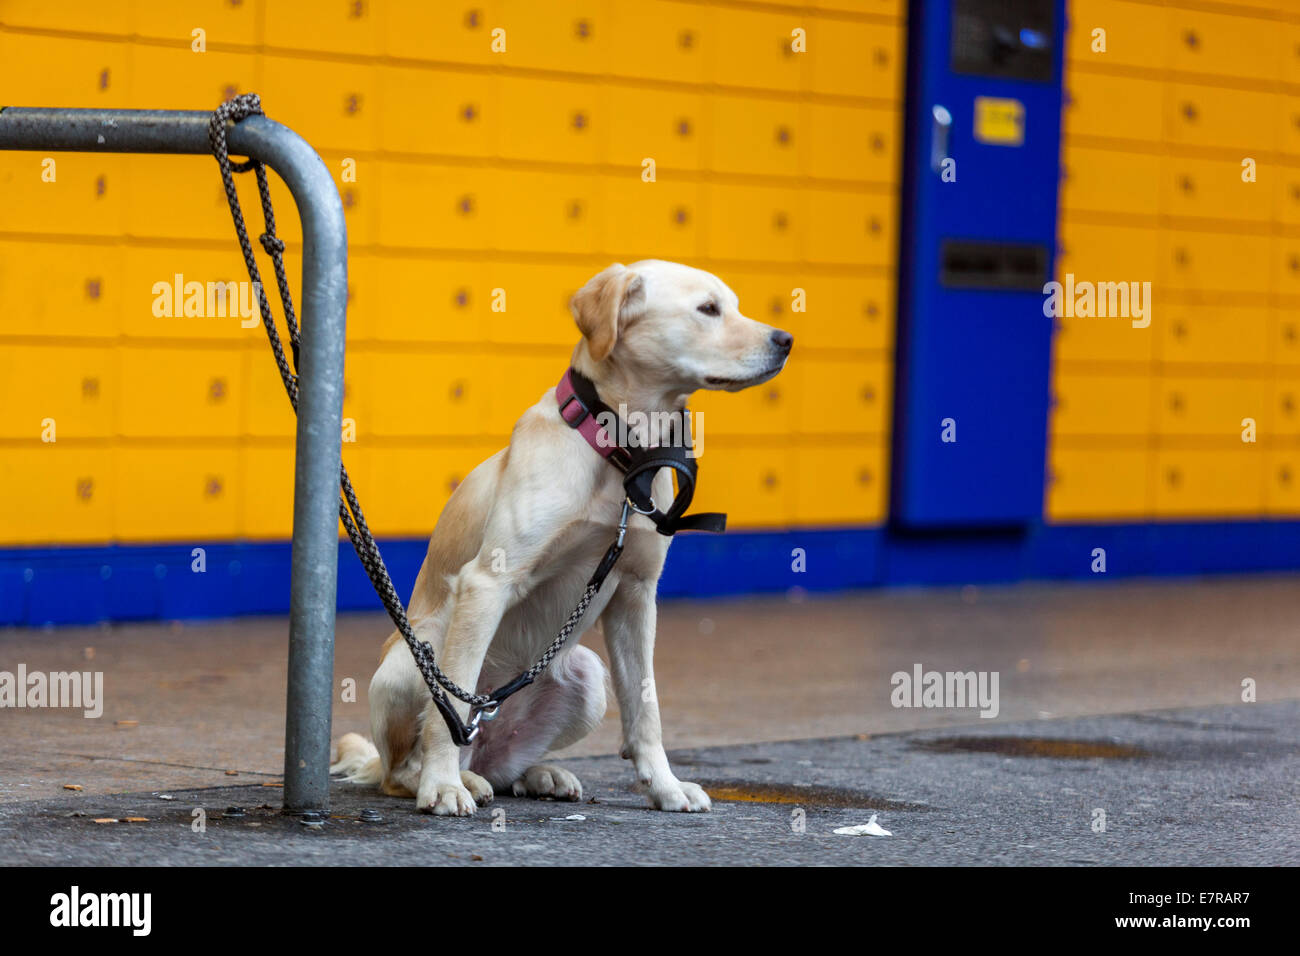 a tied up dog is waiting for its owner outside the store Stock Photo